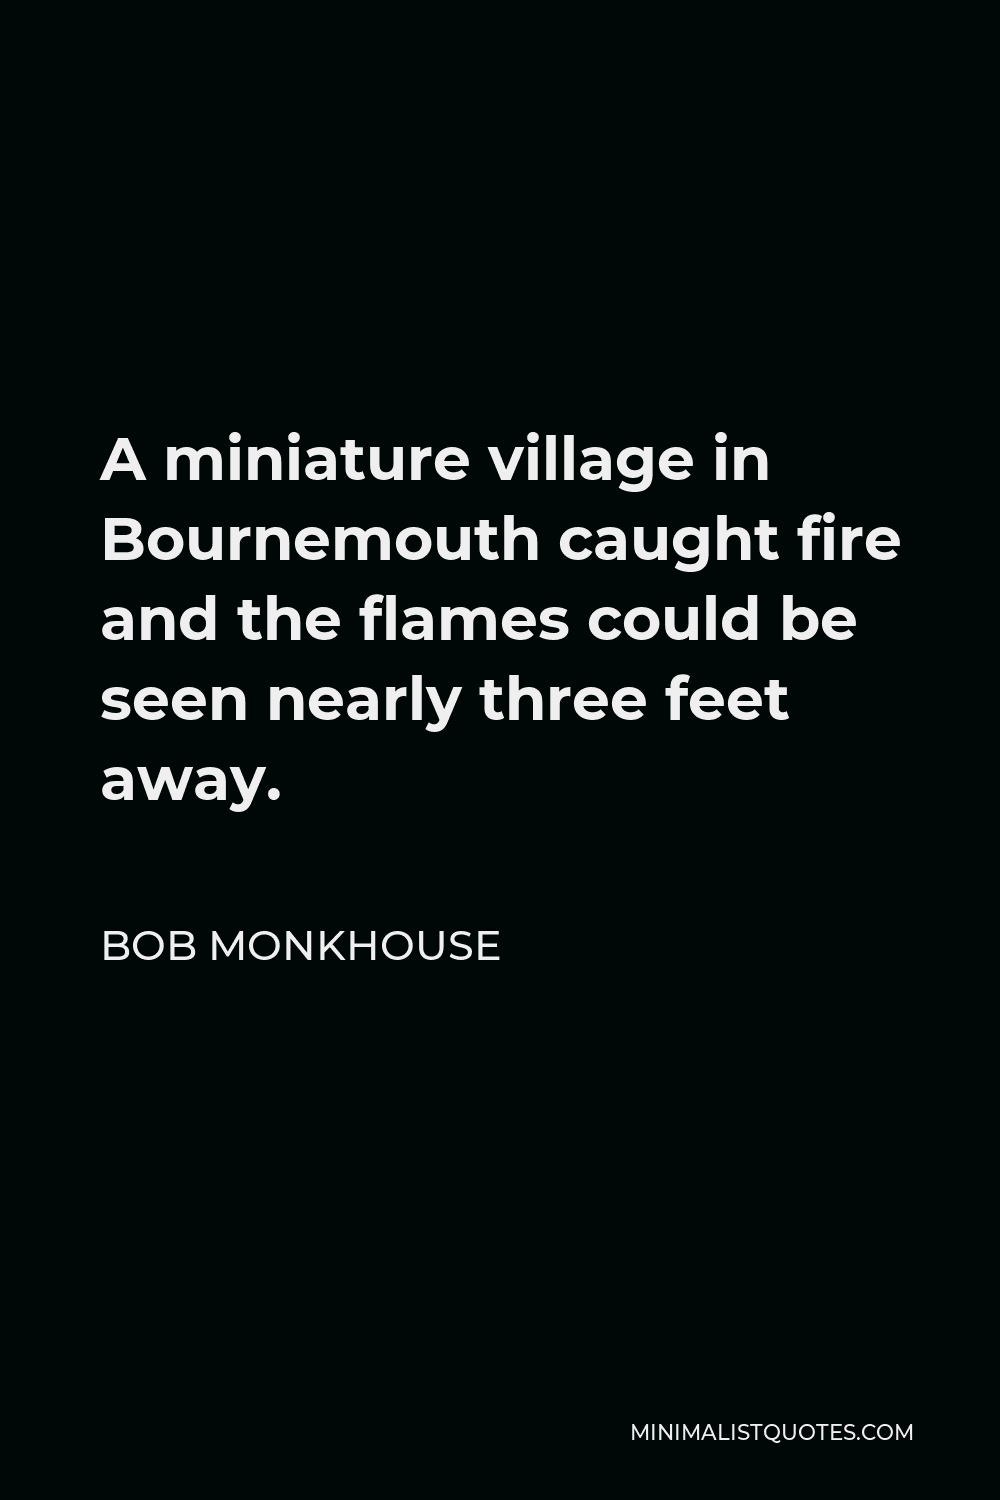 Bob Monkhouse Quote - A miniature village in Bournemouth caught fire and the flames could be seen nearly three feet away.